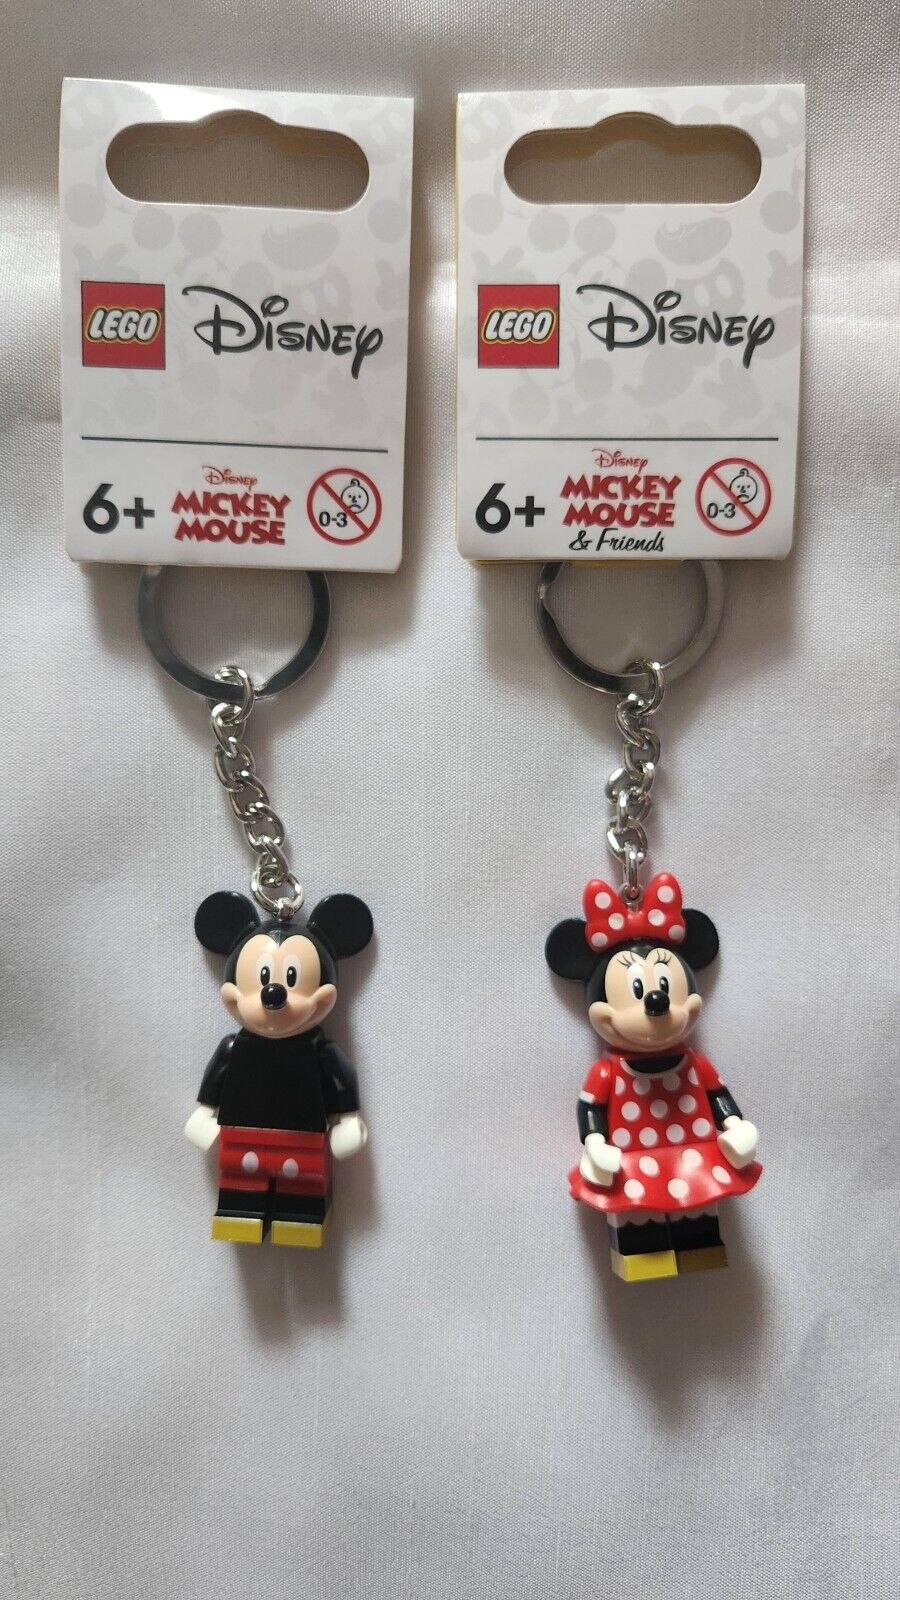 Lego Disney Mickey Mouse 853999 and Minnie Mouse 853999 MiniFigure